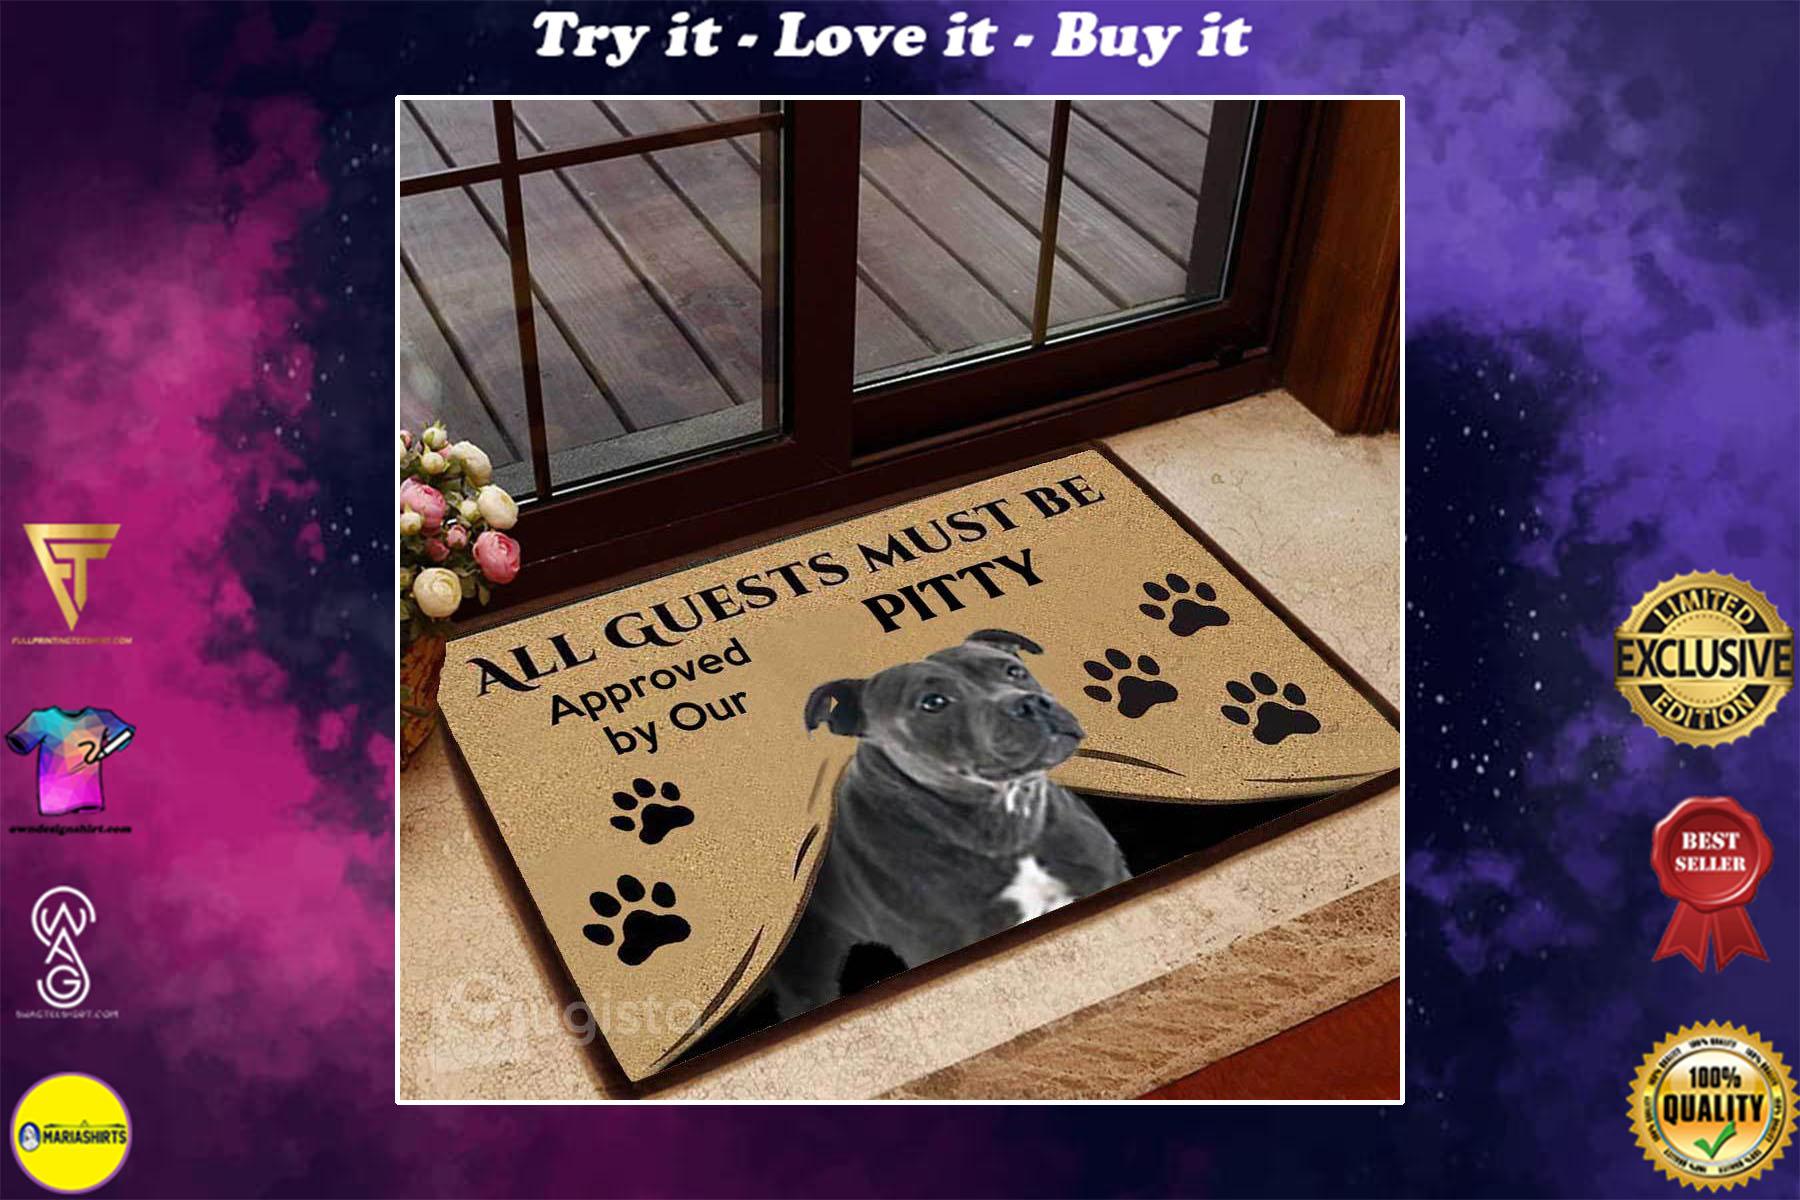 all guests must be approved by our pitty doormat